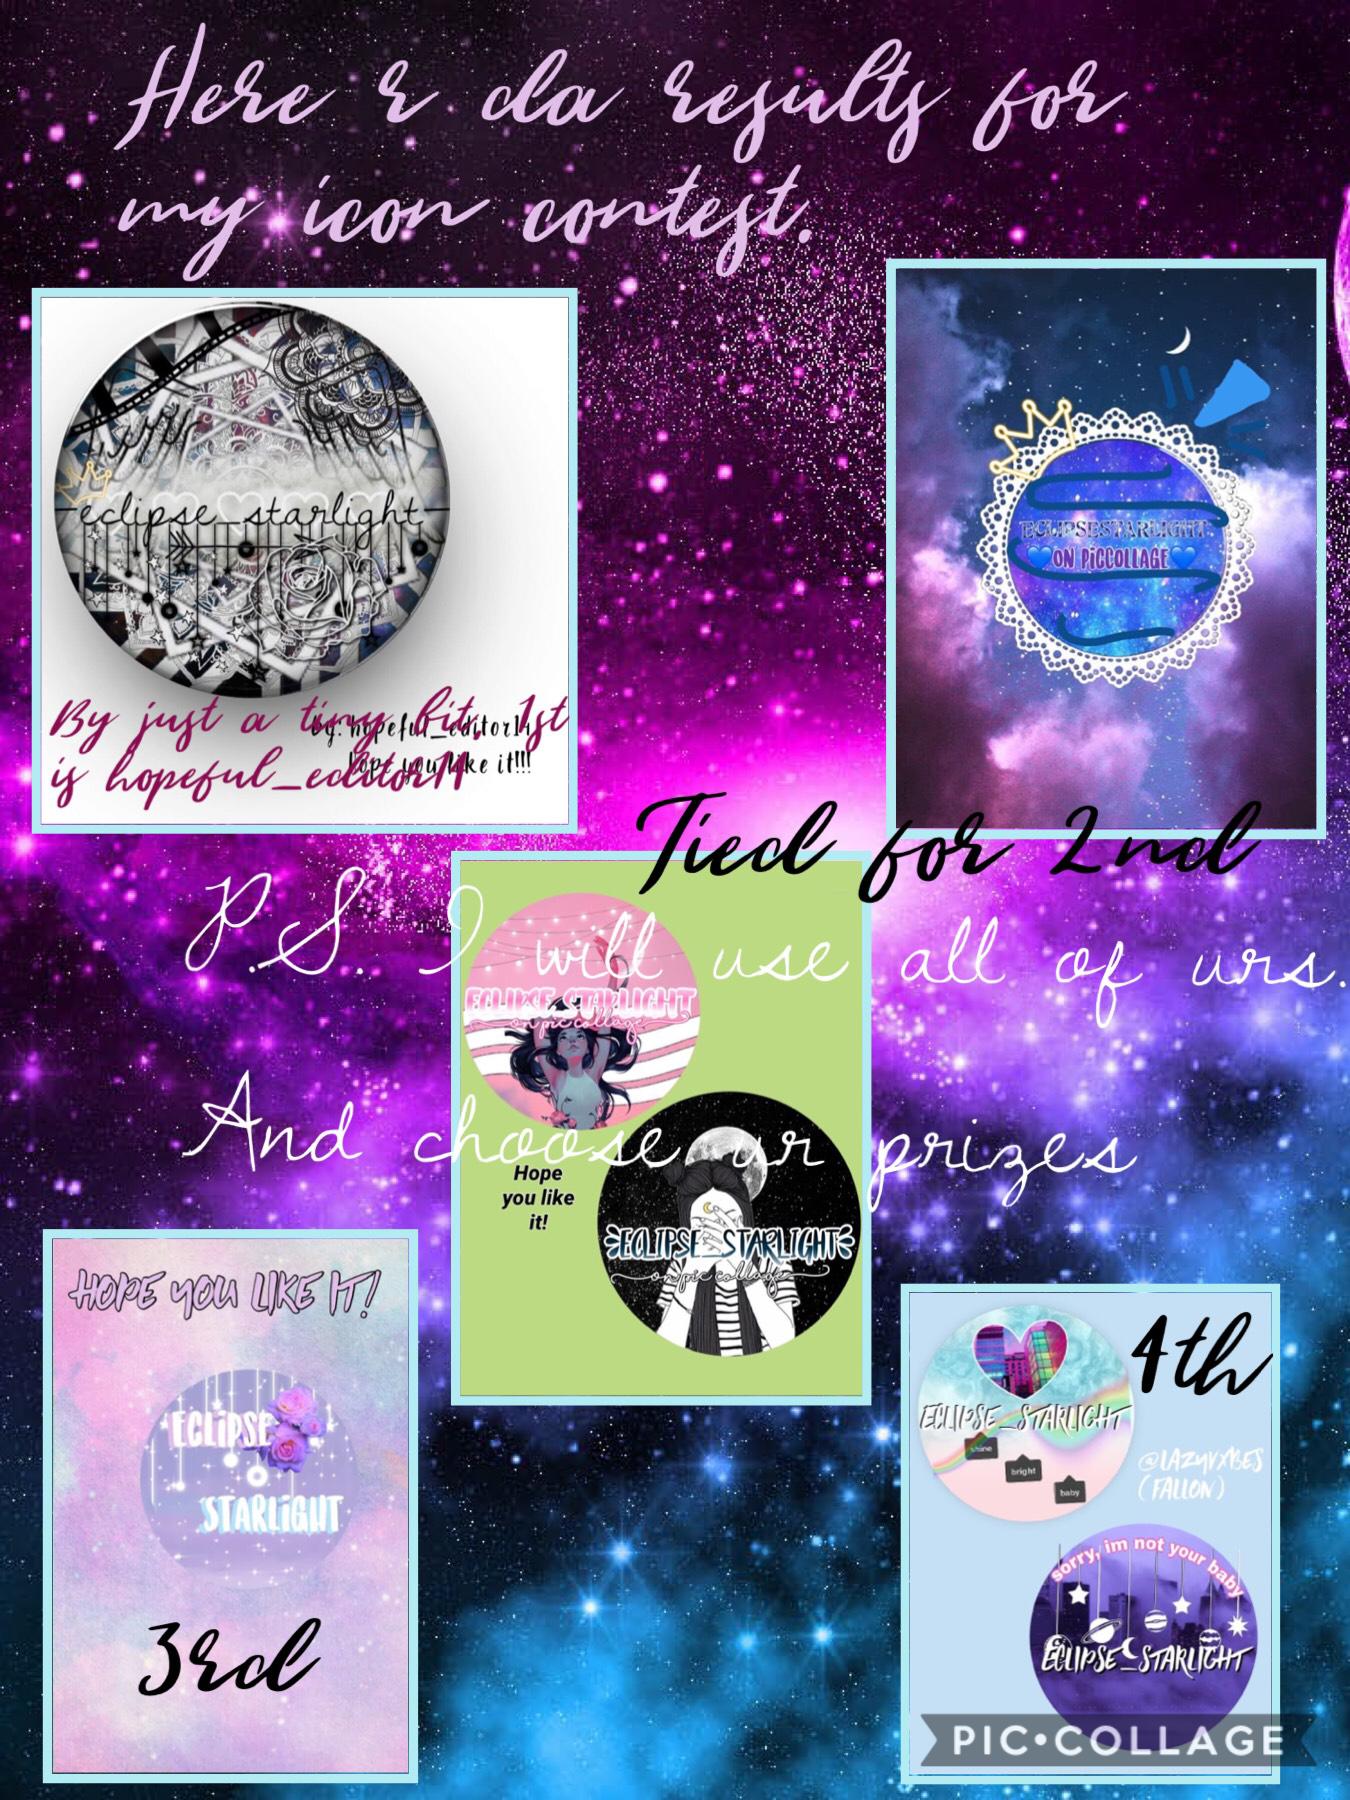 Da results!
Thank you all for participating, but by a tiny bit, the winner is hopeful_editor14! Congrats! I will use all of the icons that were submitted btw! Choose ur prizes please!